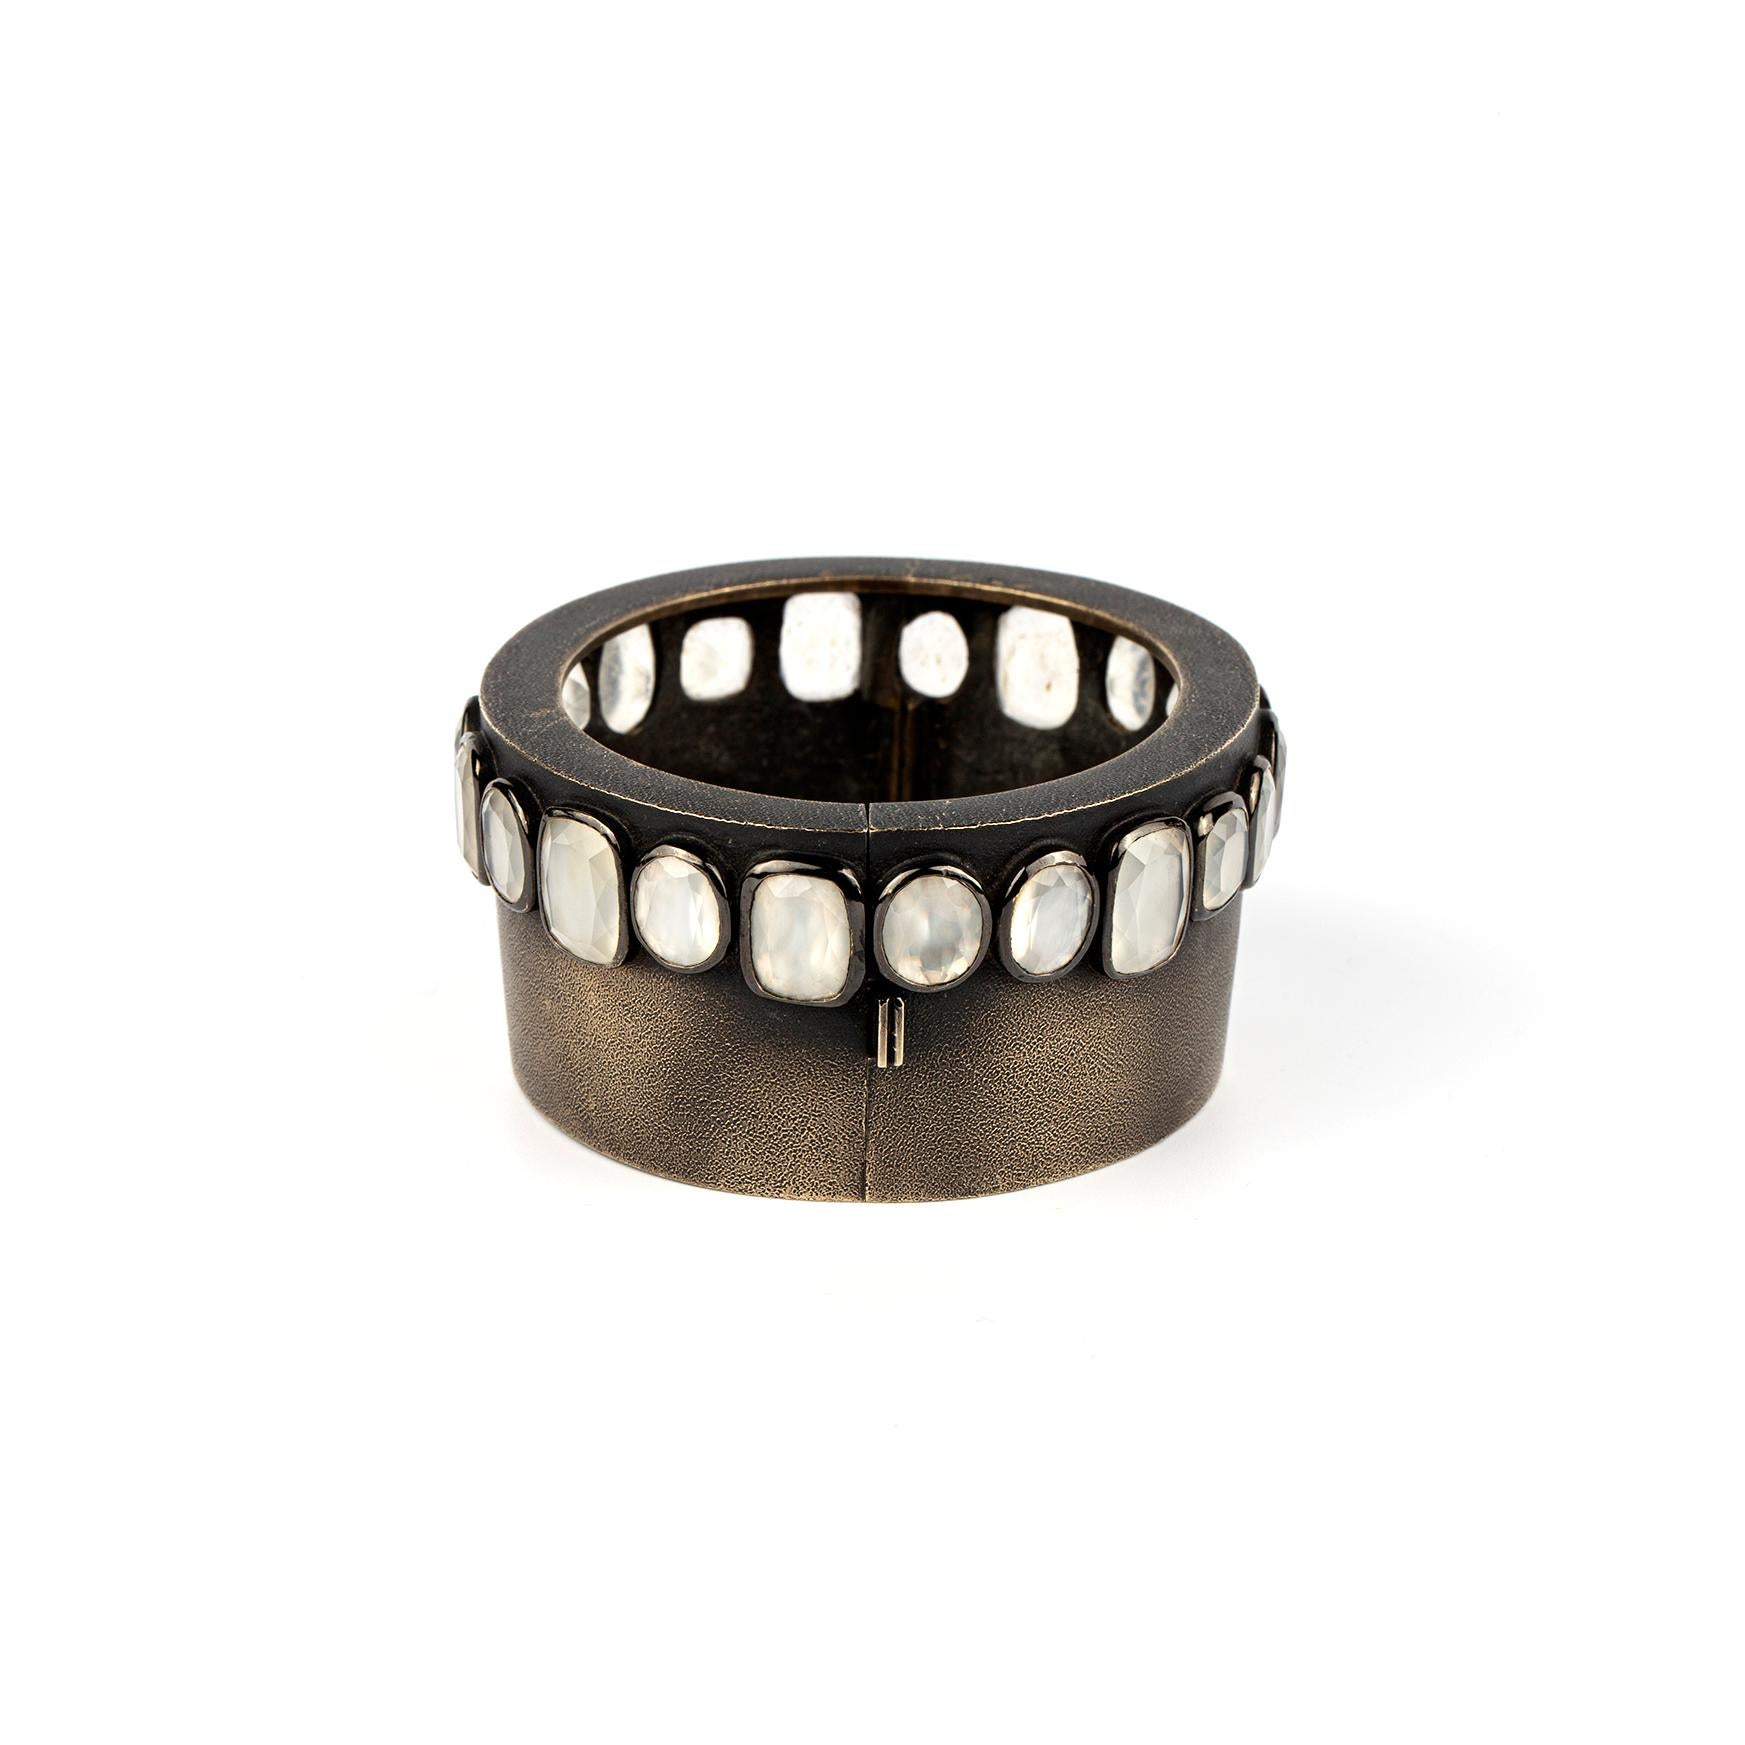 René Boivin Blackened Gold and Moonstone Cuff In Excellent Condition For Sale In New York, NY